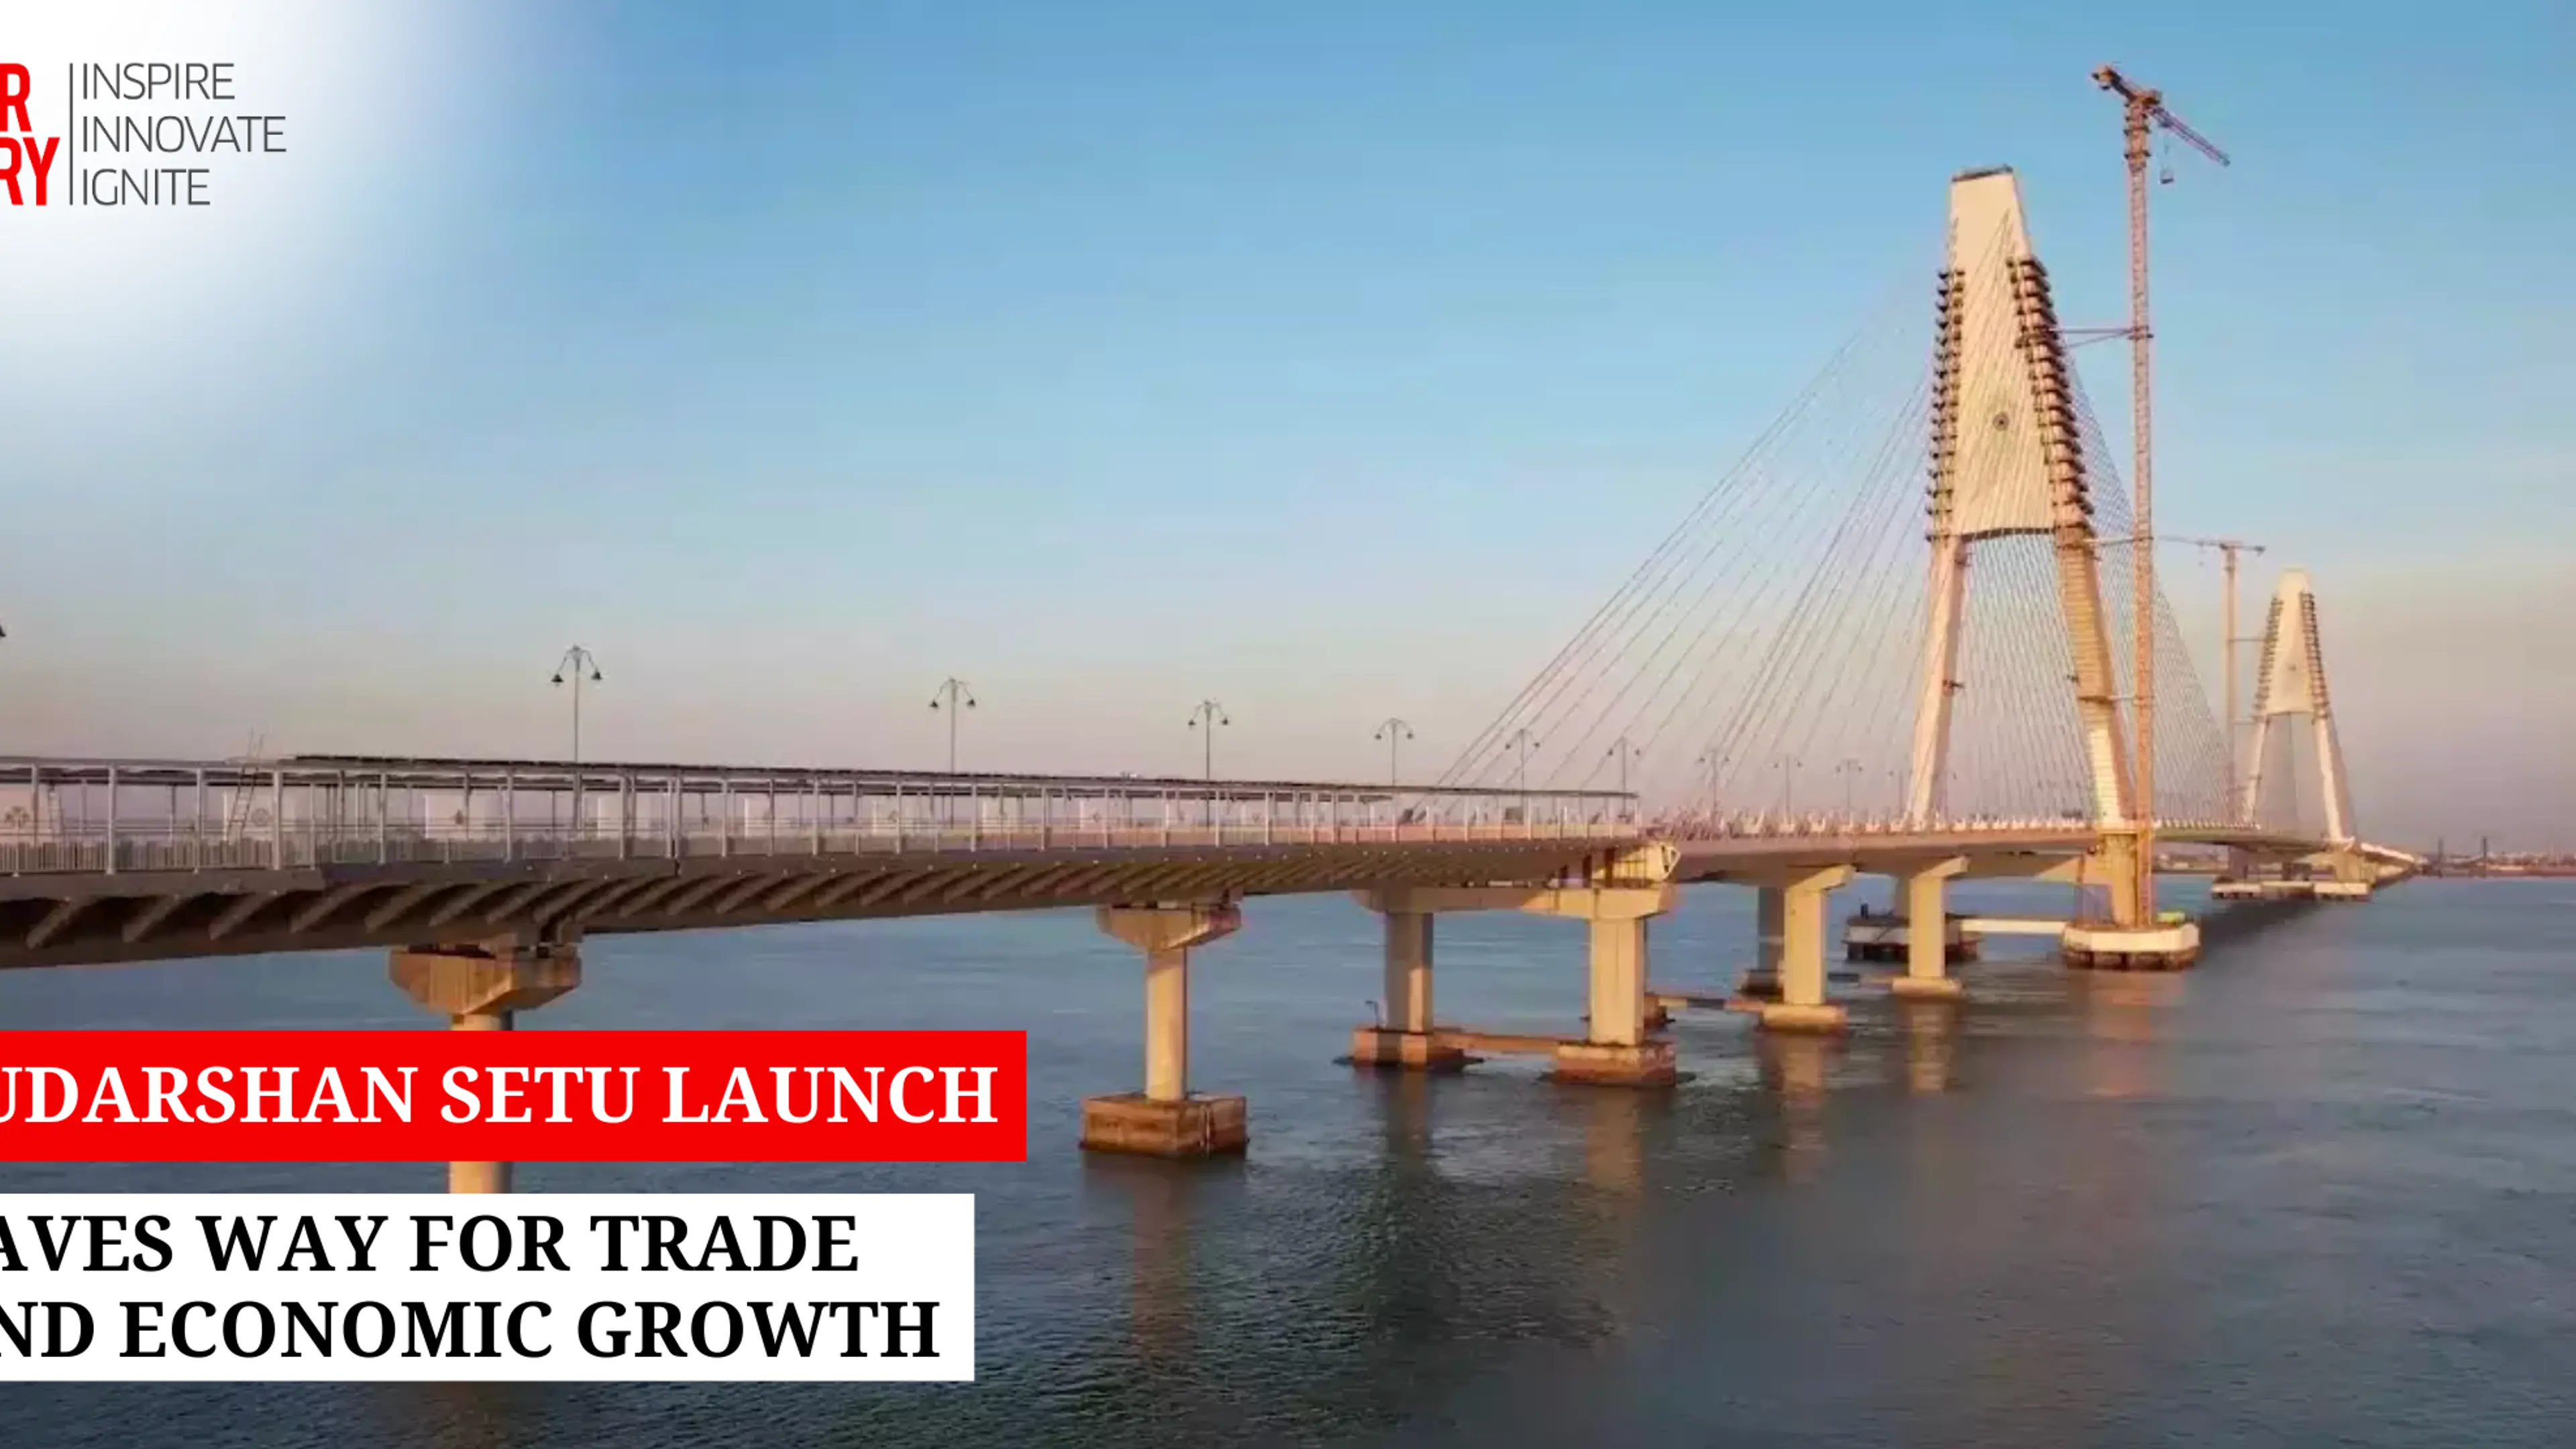 Sudarshan Setu Launch Paves Way for Trade and Economic Growth